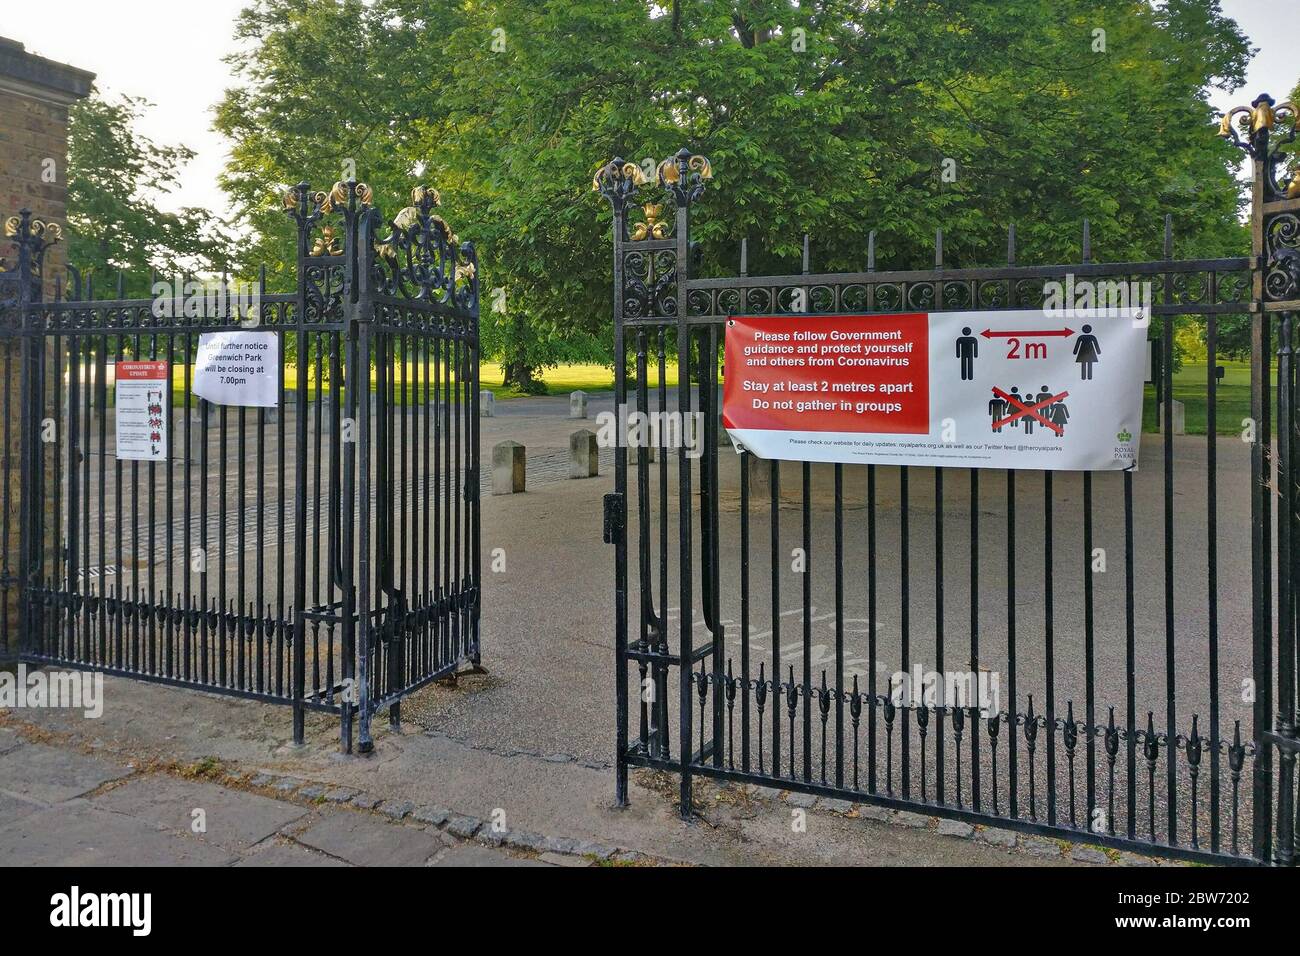 London, United Kingdom - May 08, 2020: Virus prevention advice safety sign on fence in Greenwich park due to coronavirus covid 19. Many public places Stock Photo